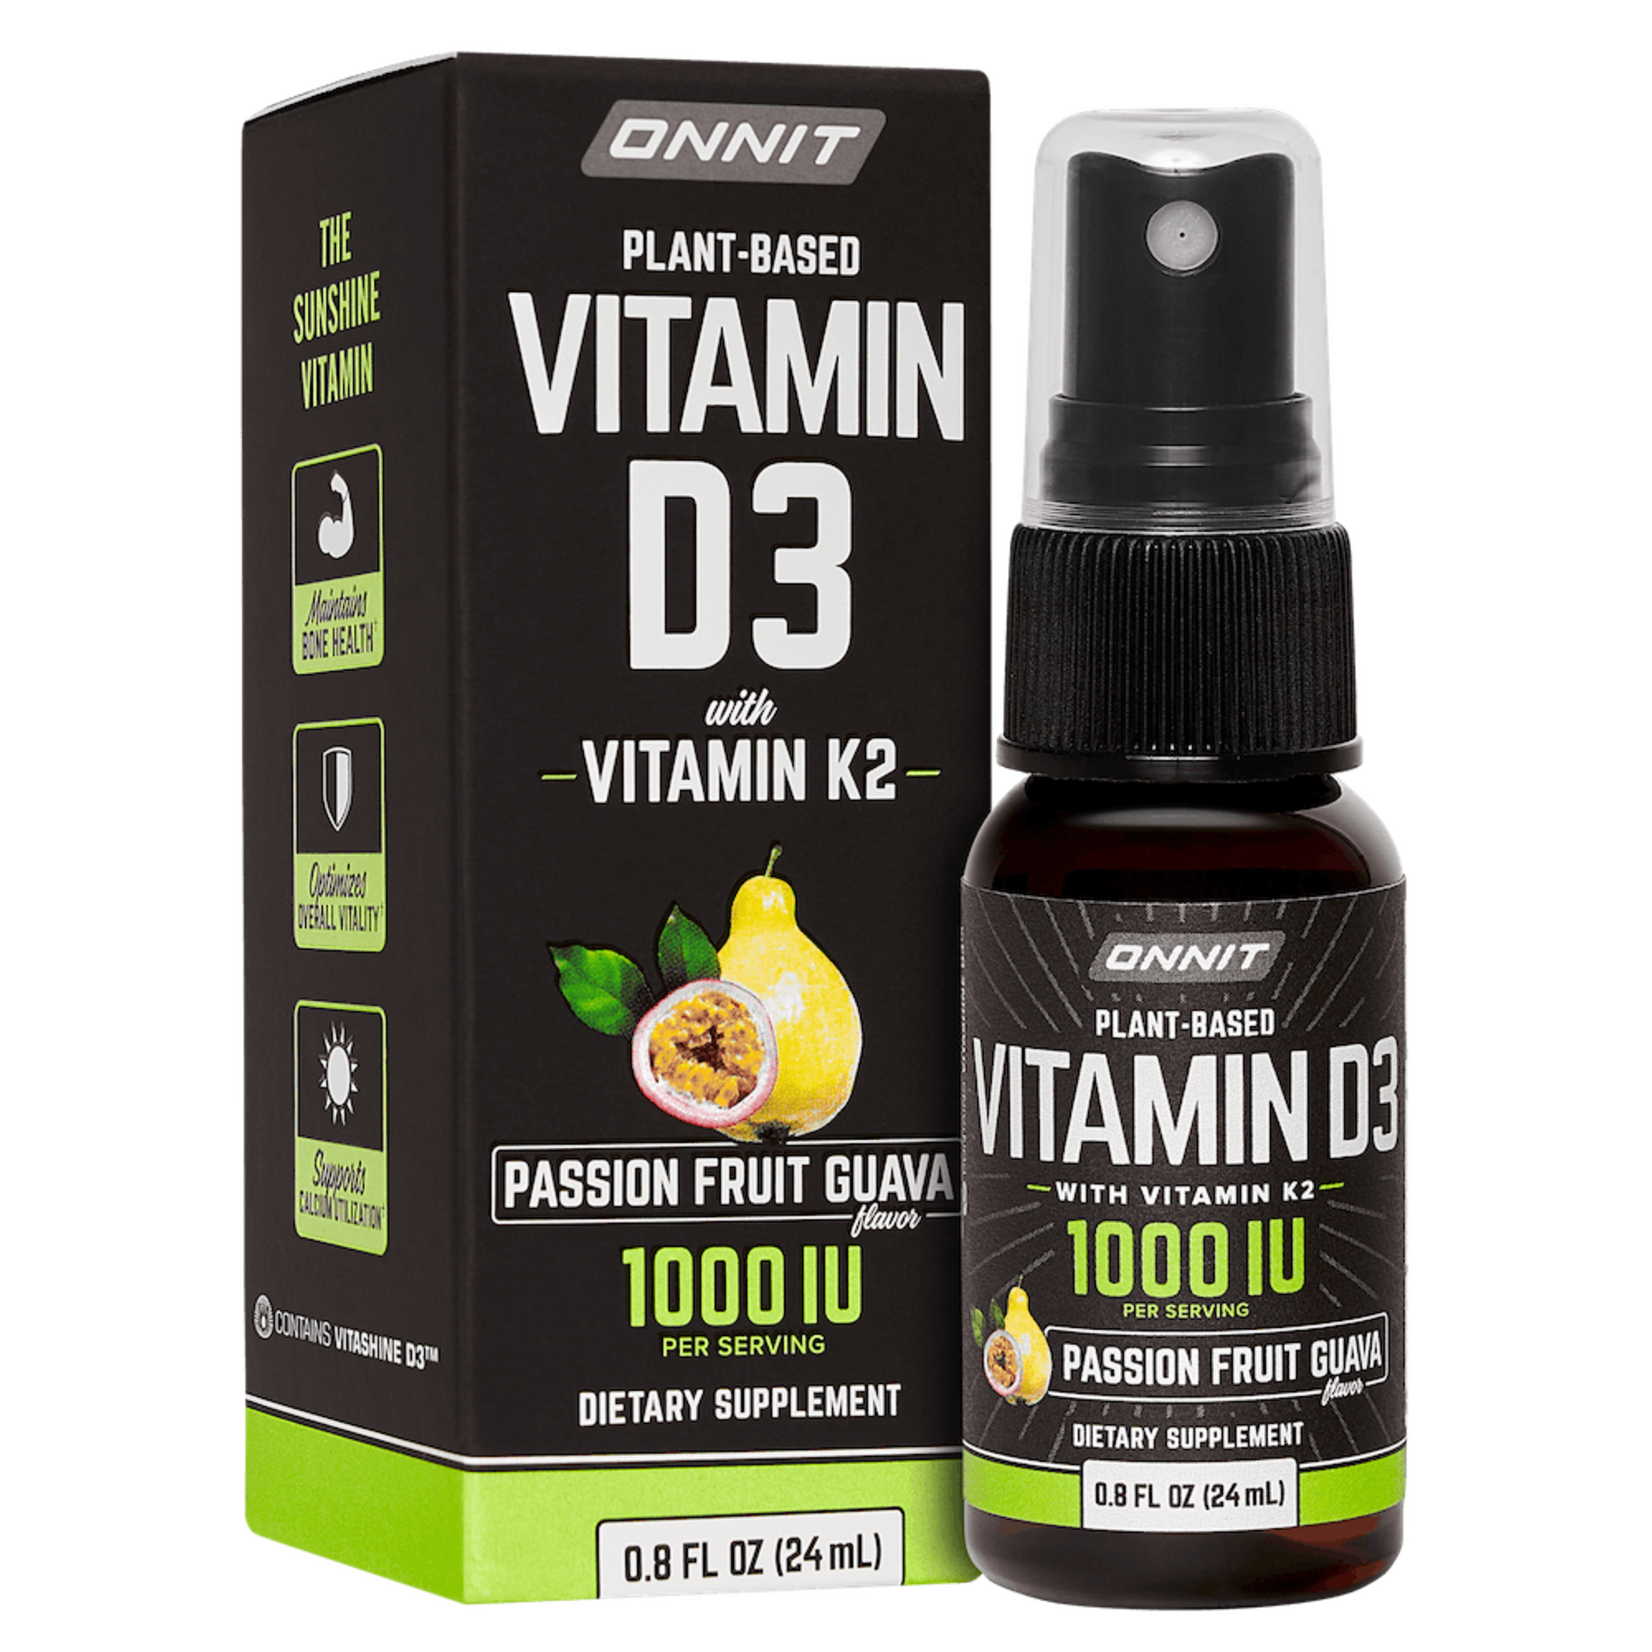 Onnit Onnit - Vegan Vitamin D3 Spray With K2 1000 IU Passion Fruit Guava - 0.8 oz